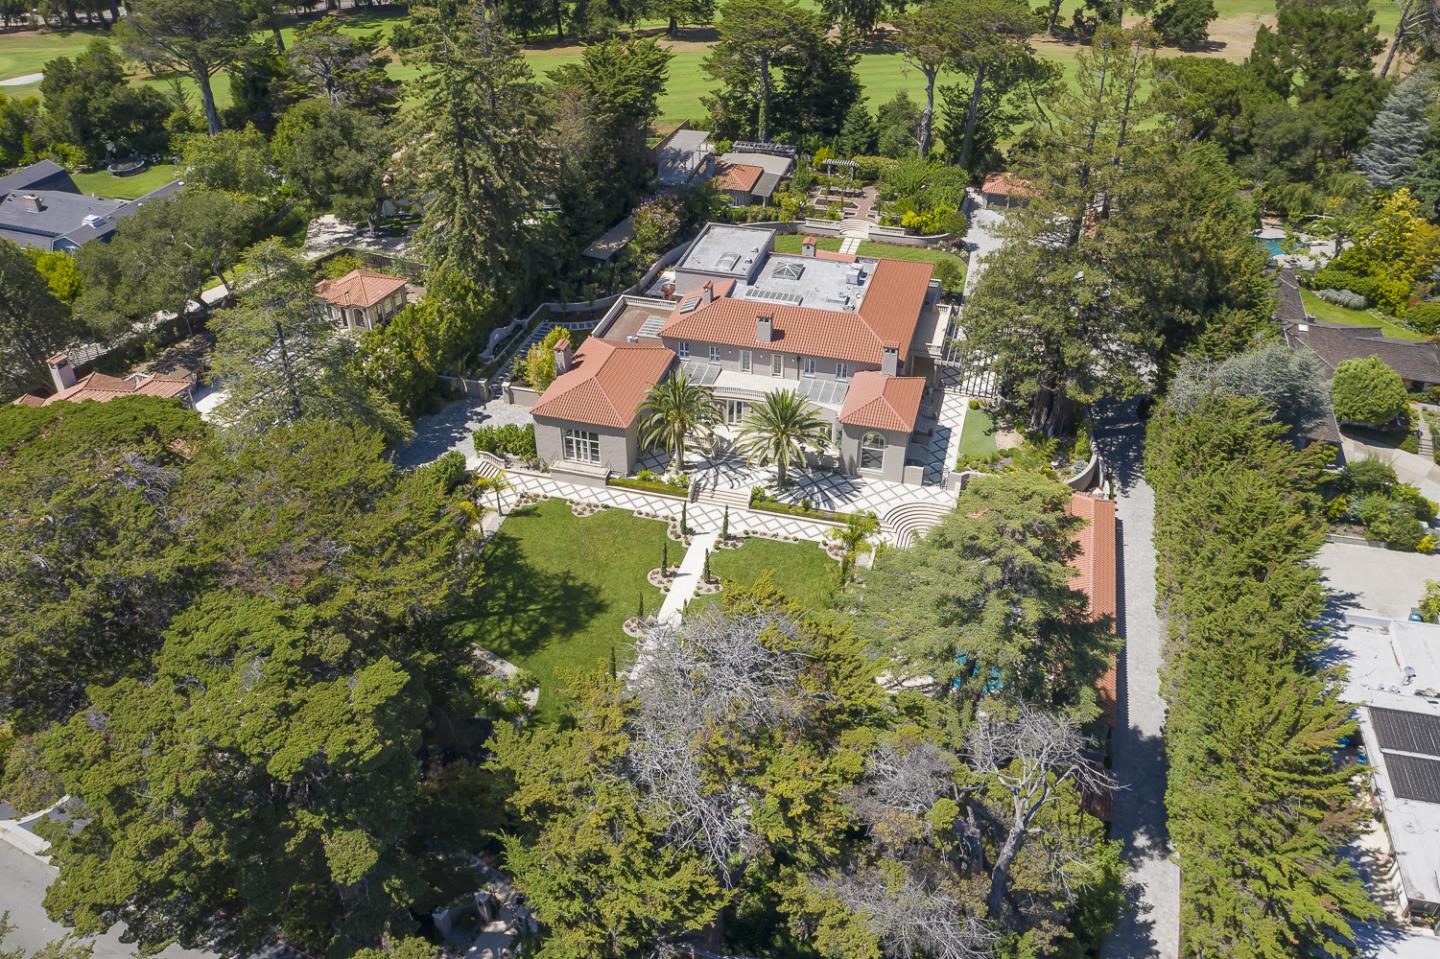 GREAT OPPORTUNITY FOR THIS TROPHY ESTATE***If you are looking for the best of the best, this is a once-in-a-lifetime opportunity for you to enjoy your life! After years of renovations, 1868 Floribunda Avenue is ready for you to view! The lot is almost 5x bigger than standard lots, all usable! Renovated to the highest quality, situated in one of the best locations in Hillsborough! Nearly 20,000 square feet throughout 6 buildings. New custom-built water well. Three private gates - resident driveway, guest driveway, and pedestrian walkway. No expense was spared for this property to reach the ultimate heights in a smart & secure dream home! You have to see it, to believe it! Qualified buyers only; qualifications requested in order to be screened before showings.